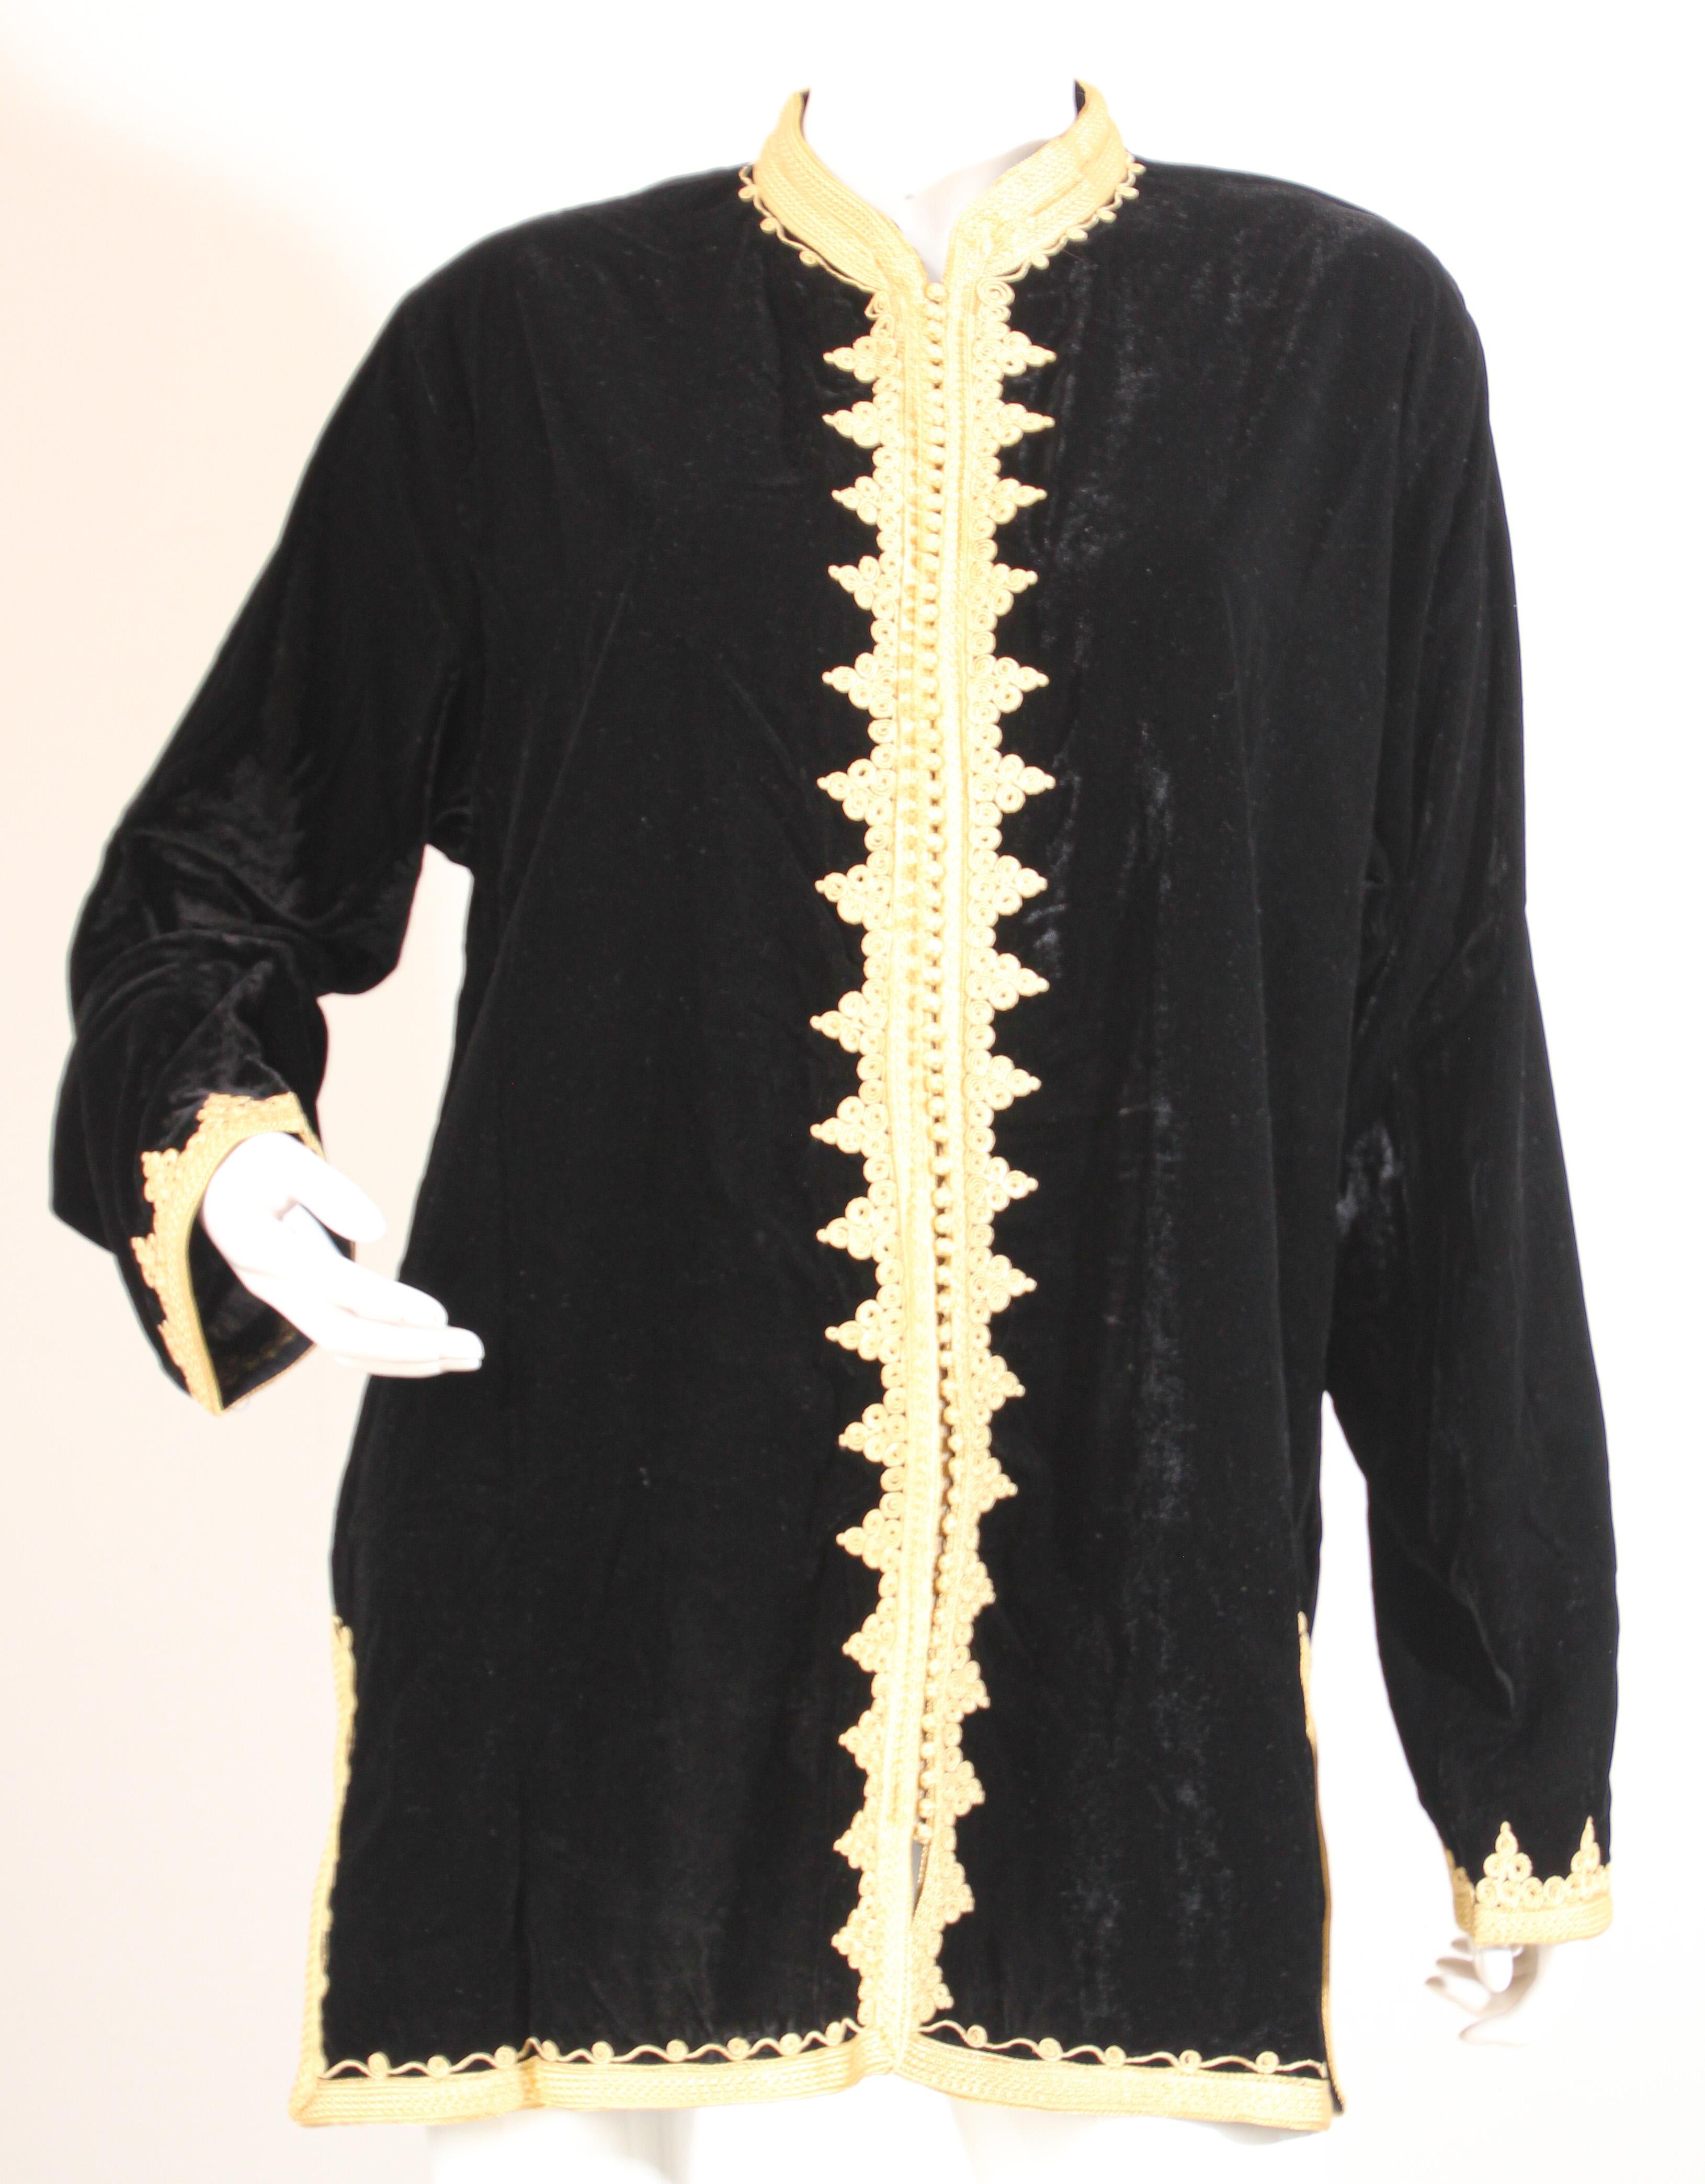 Moroccan Kaftan Black Velvet Vest with Gold Embroideries
This Moroccan traditional kaftan is embroidered and embellished with gold trim.
Evening Moroccan traditional short dress vest.
The kaftan features a traditional neckline and embellished